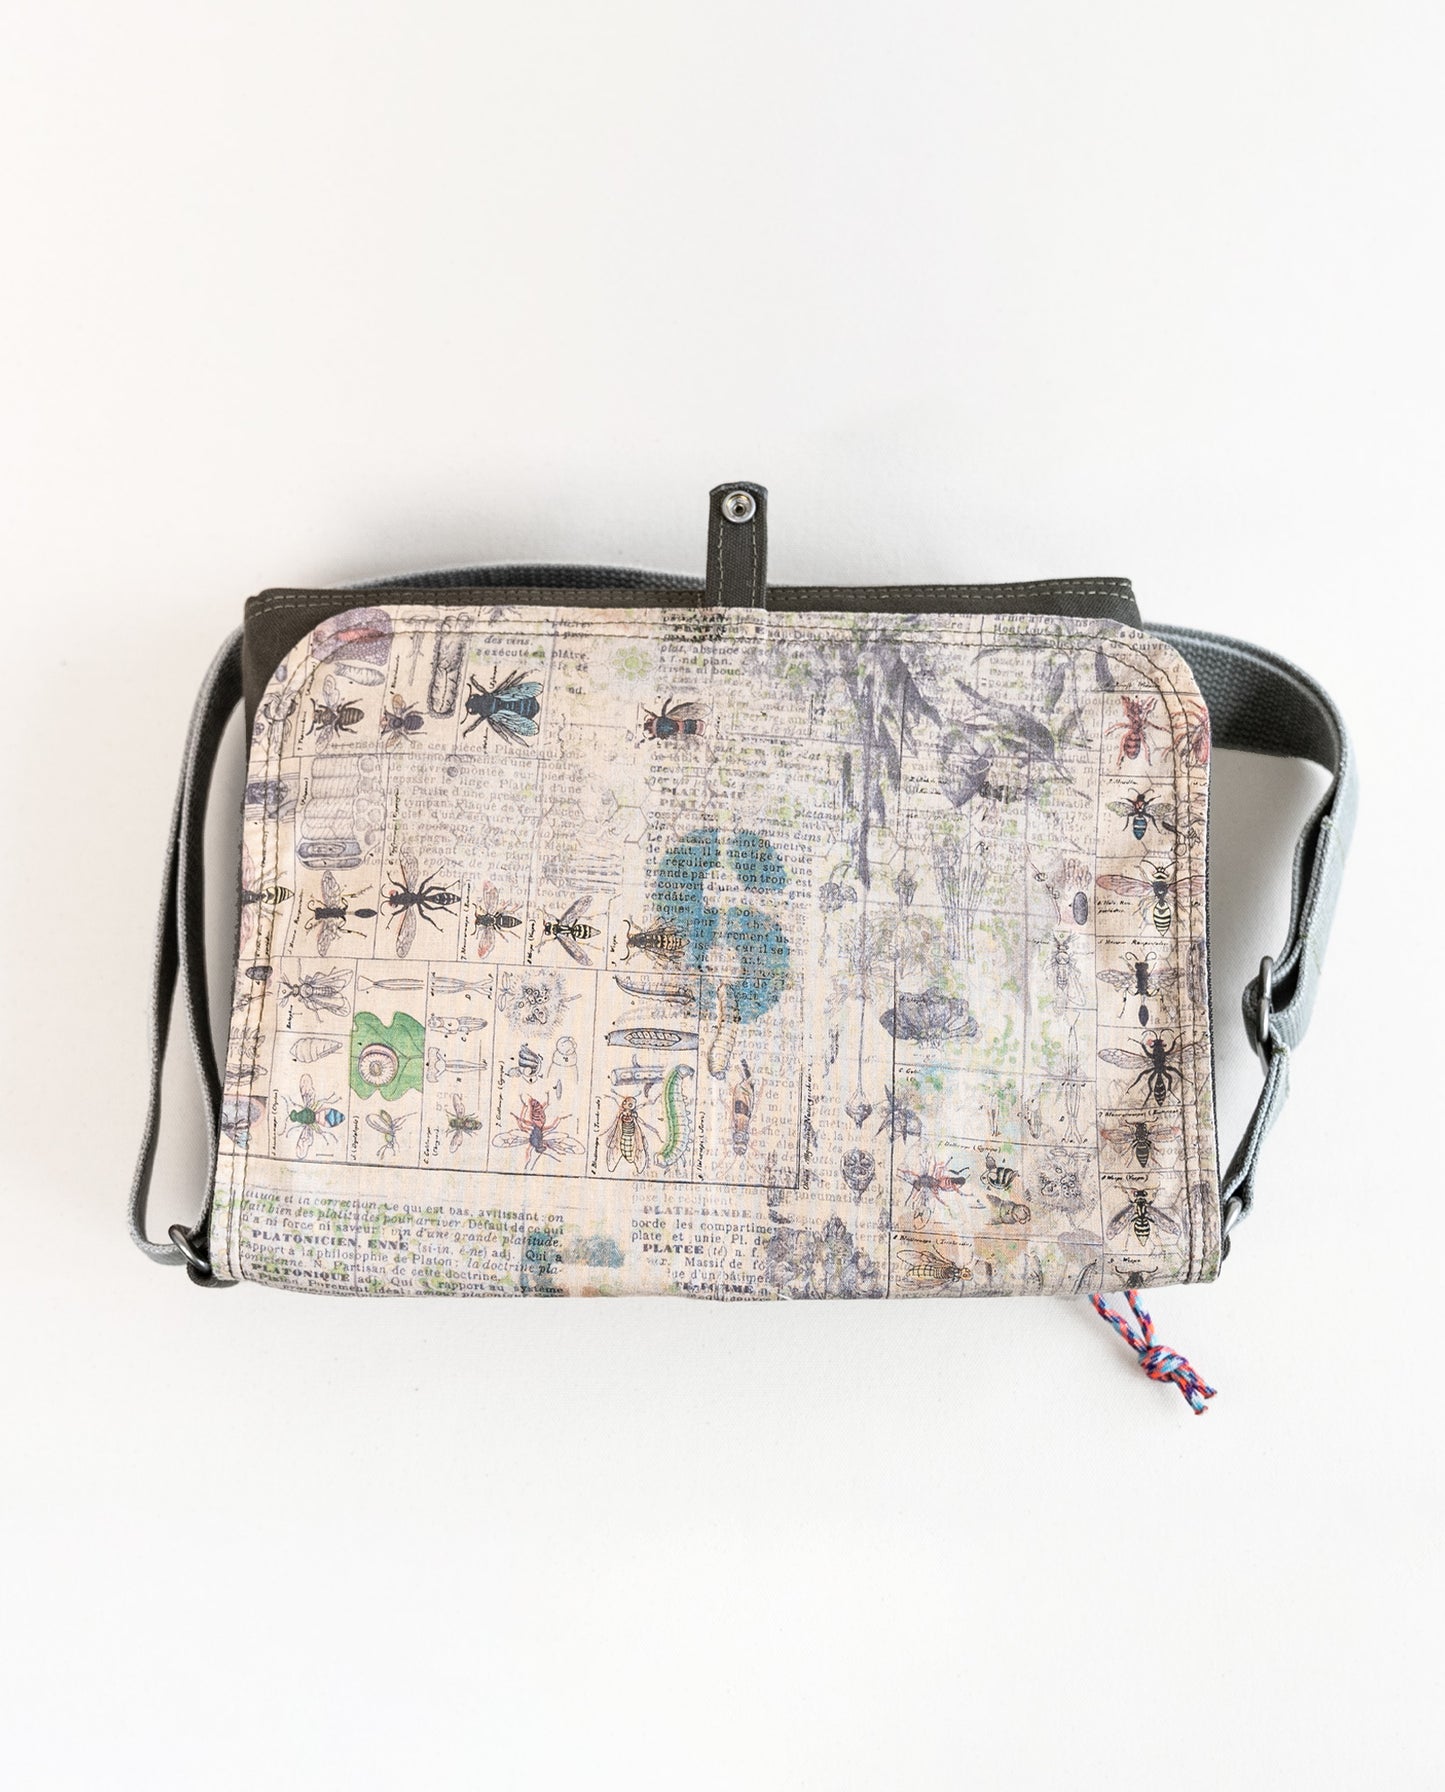 Inside of flap showing entomology print lining fabric of Dock 5’s Wild Cat Canvas Messenger Bag in olive featuring art from owner Natalija Walbridge